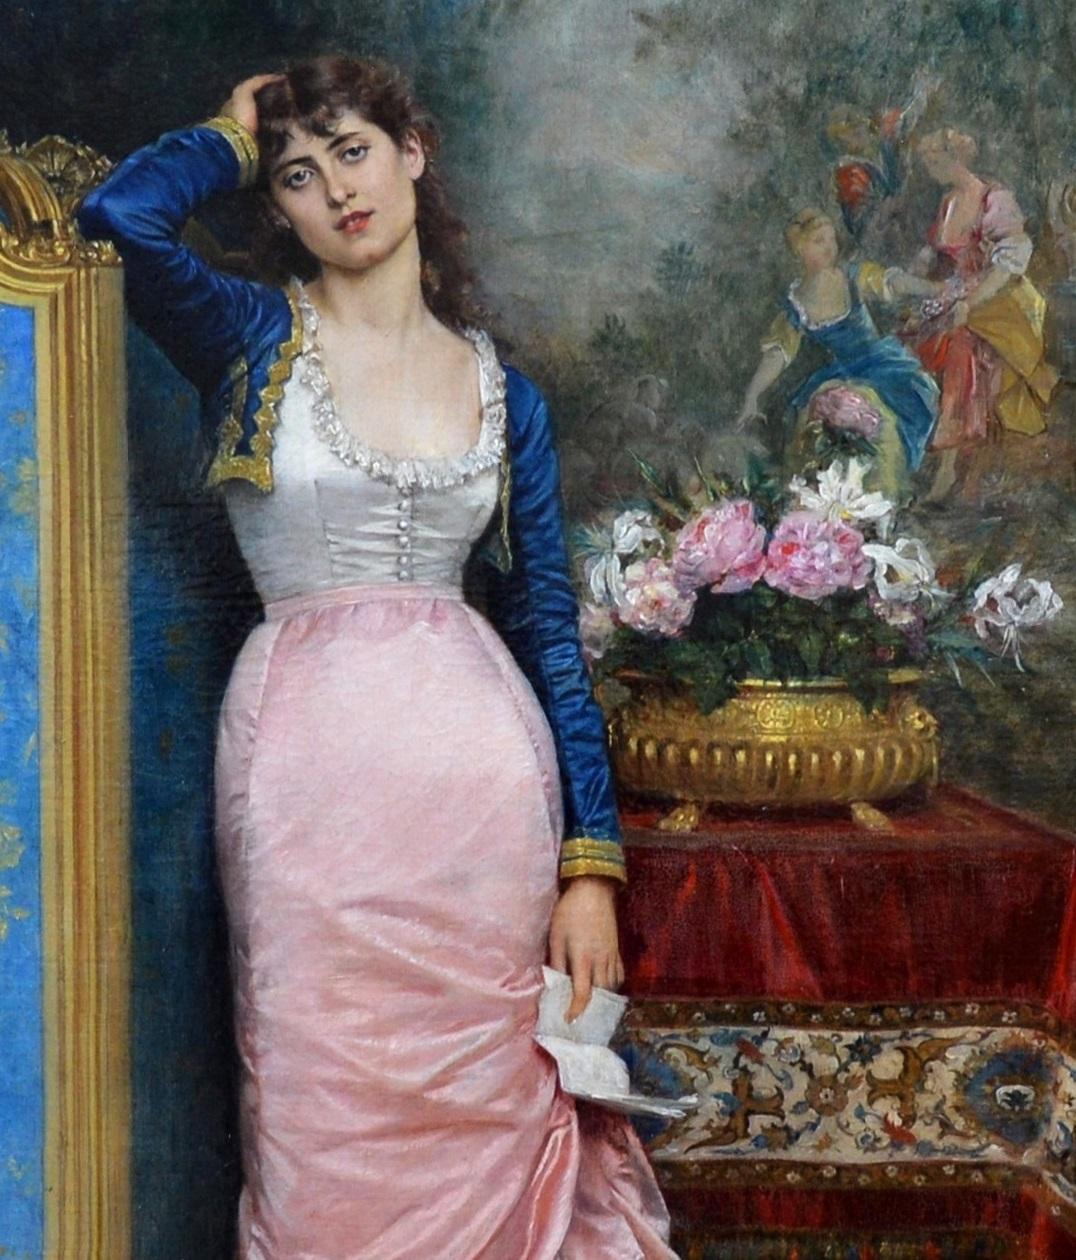 Declaration of Love - 19th Century French Belle Epoque Portrait Oil Painting - Brown Figurative Painting by Auguste Toulmouche